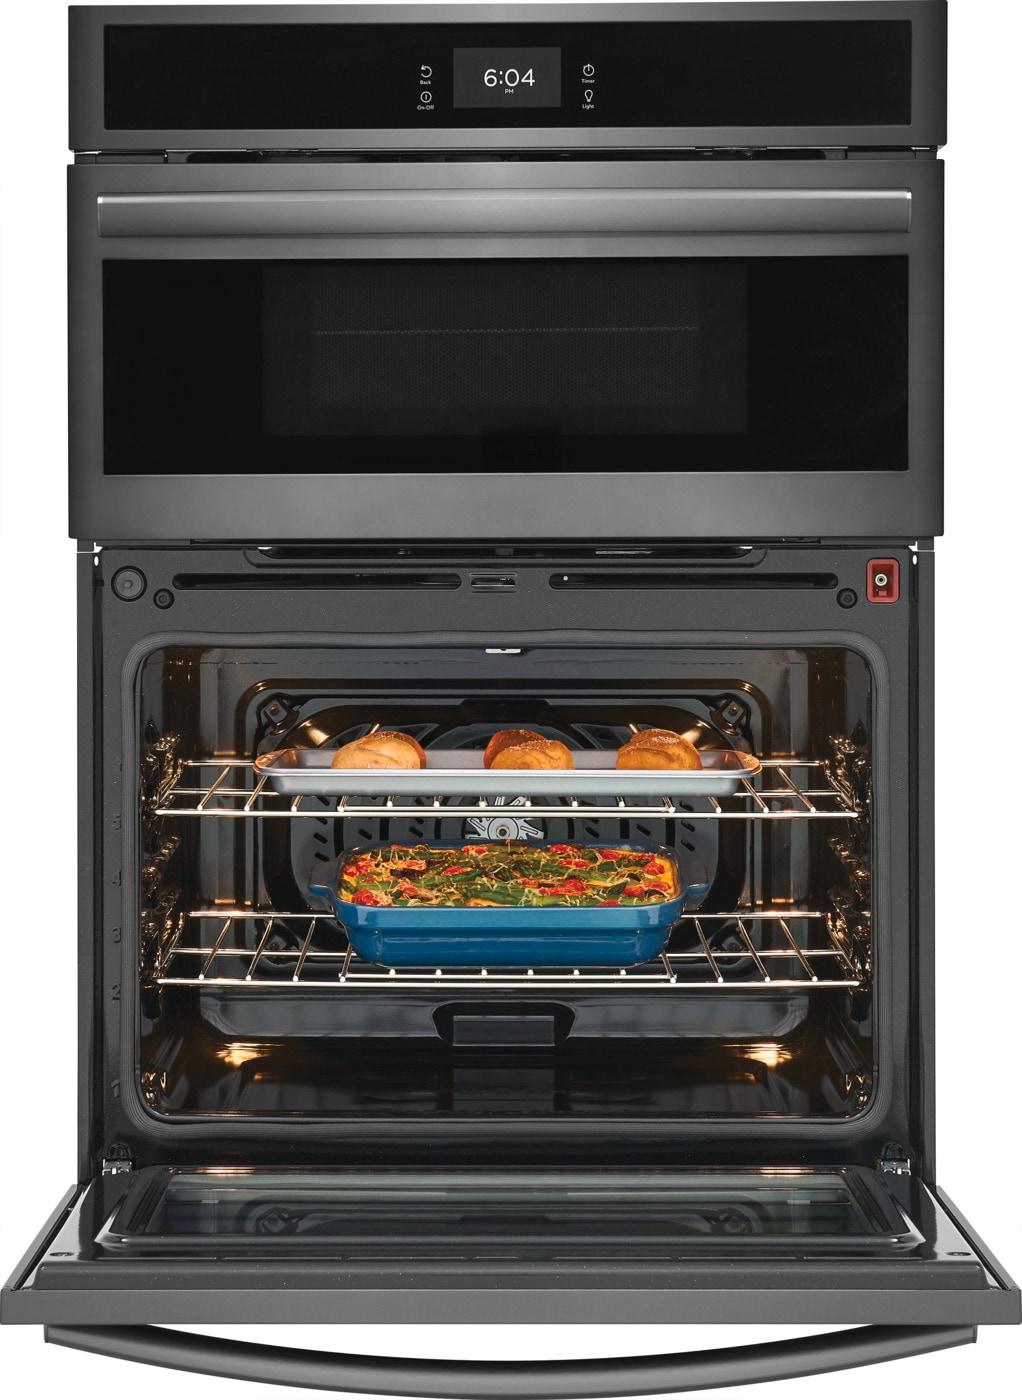 Frigidaire GCWM3067AD Frigidaire Gallery 30'' Wall Oven And Microwave Combination